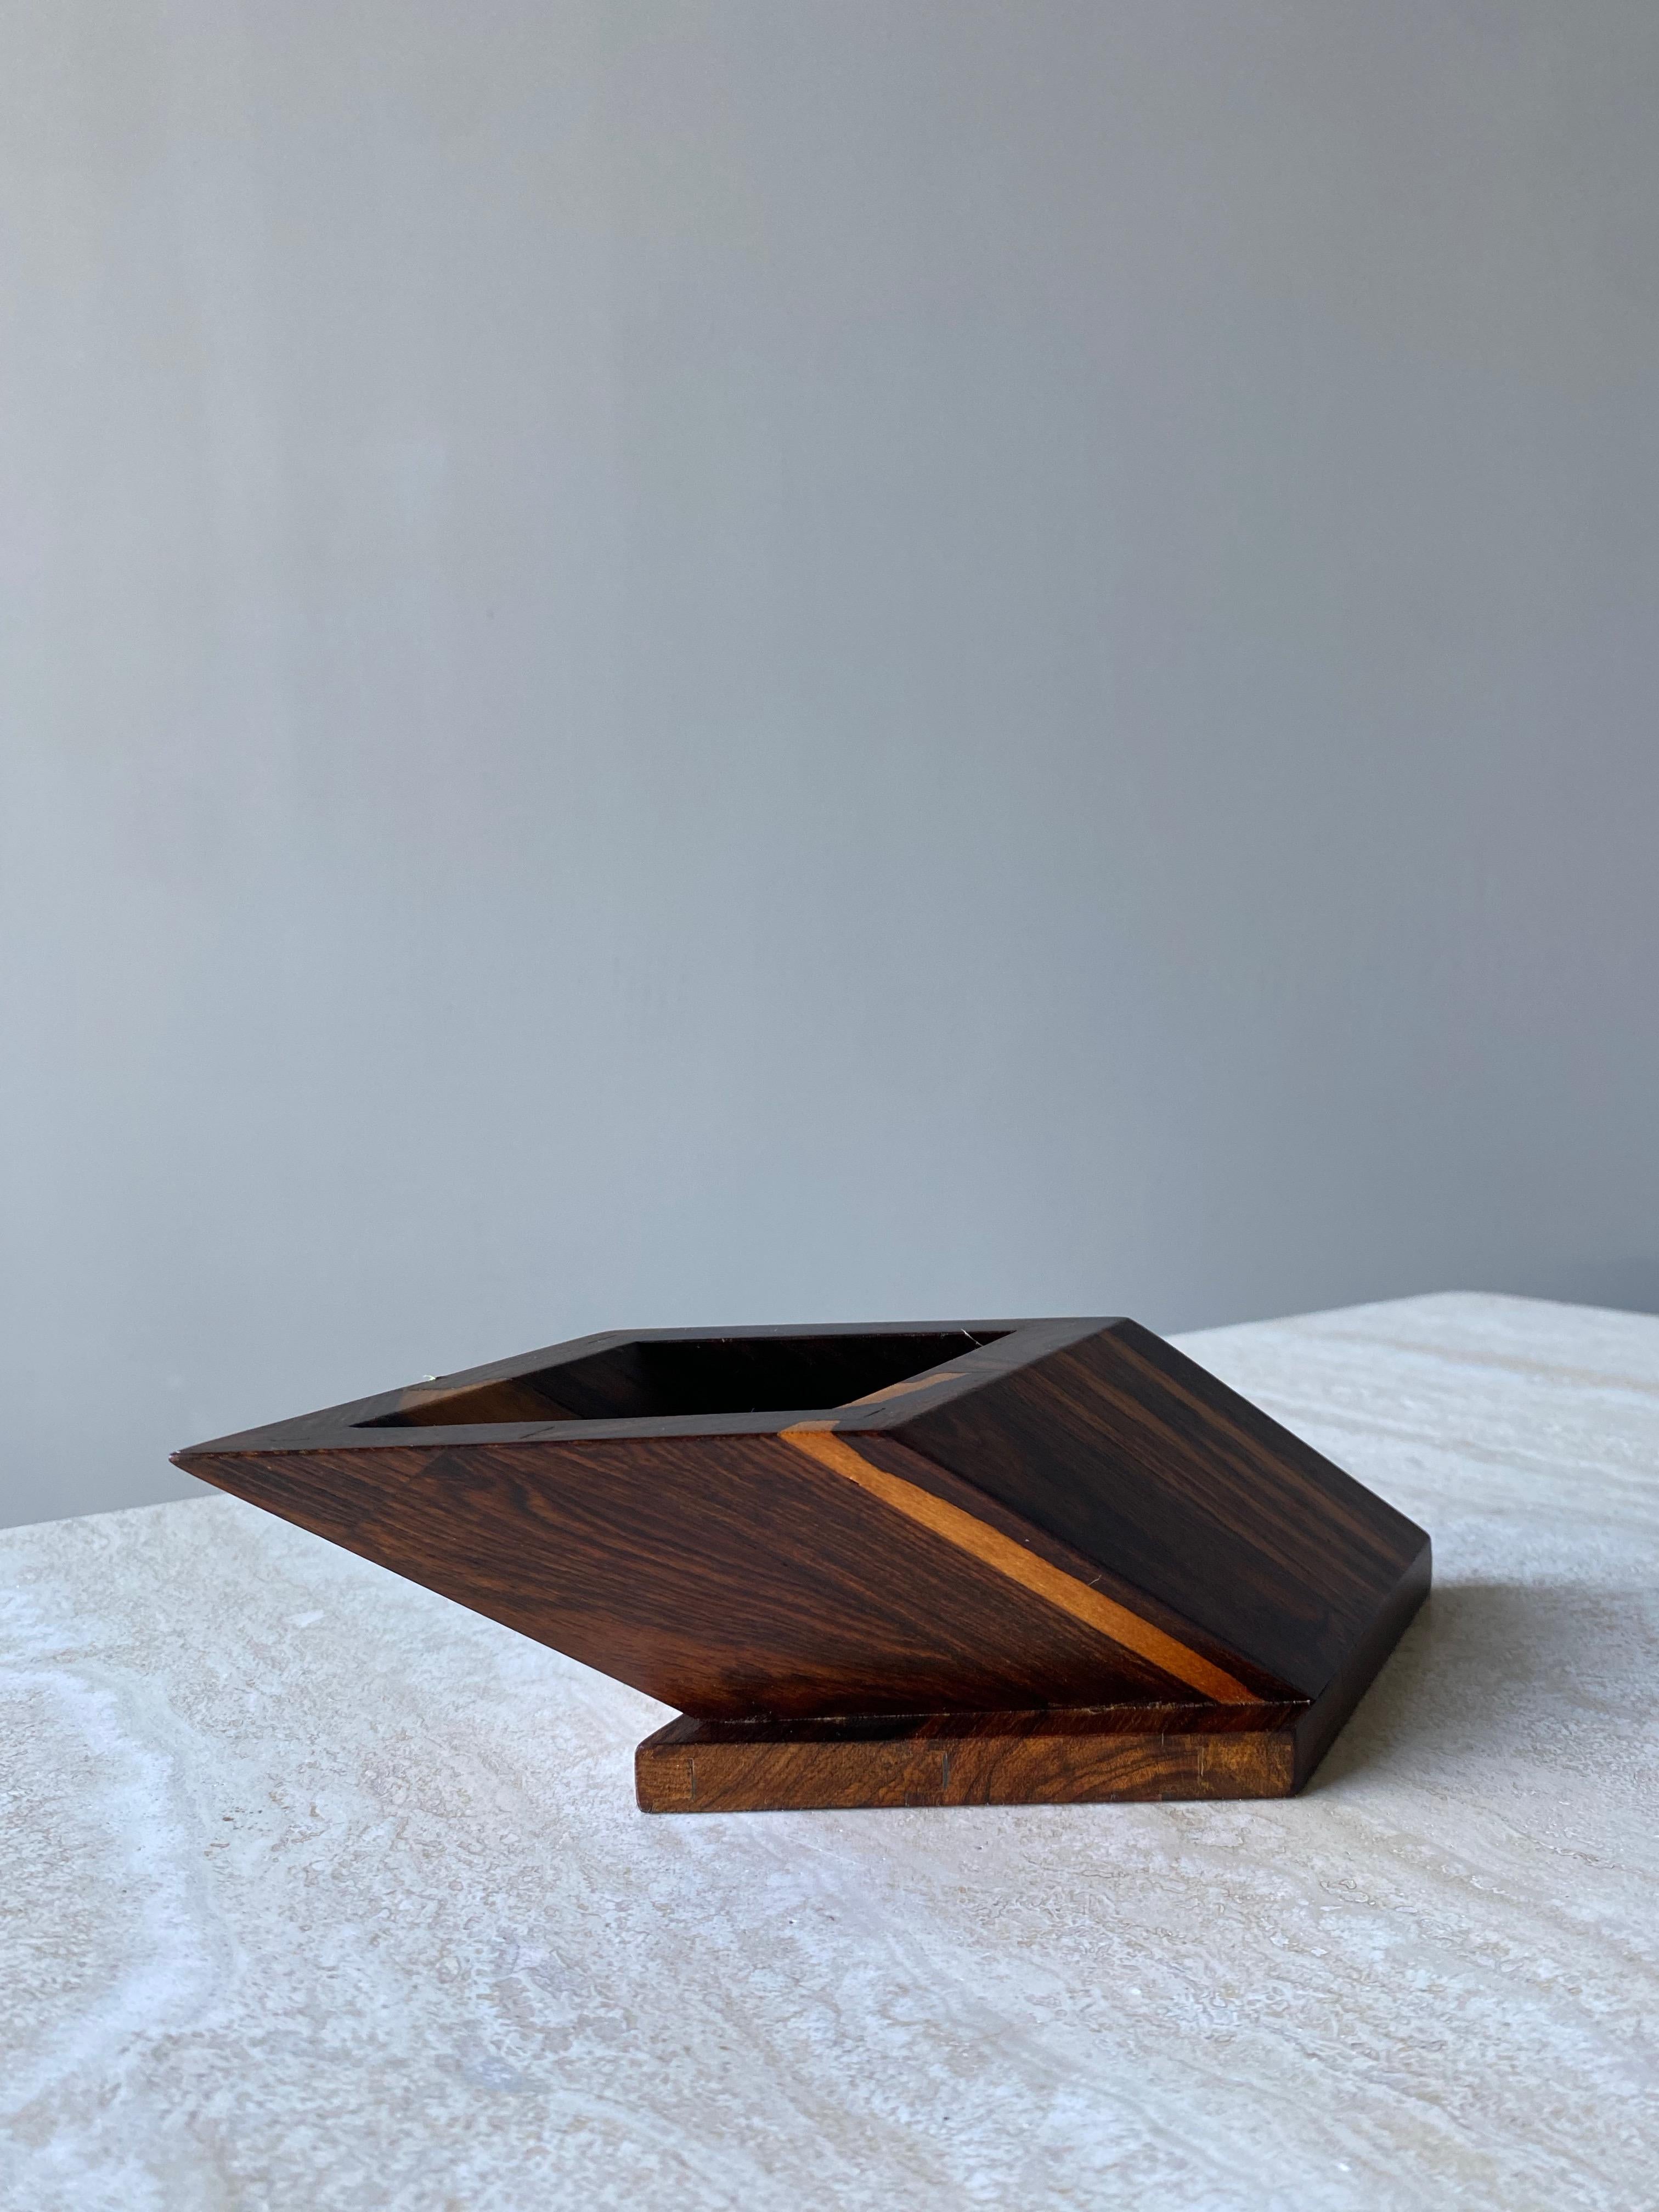 Don Shoemaker Cocobolo Pencil Holder for Señal, Mexico, 1980s For Sale 7